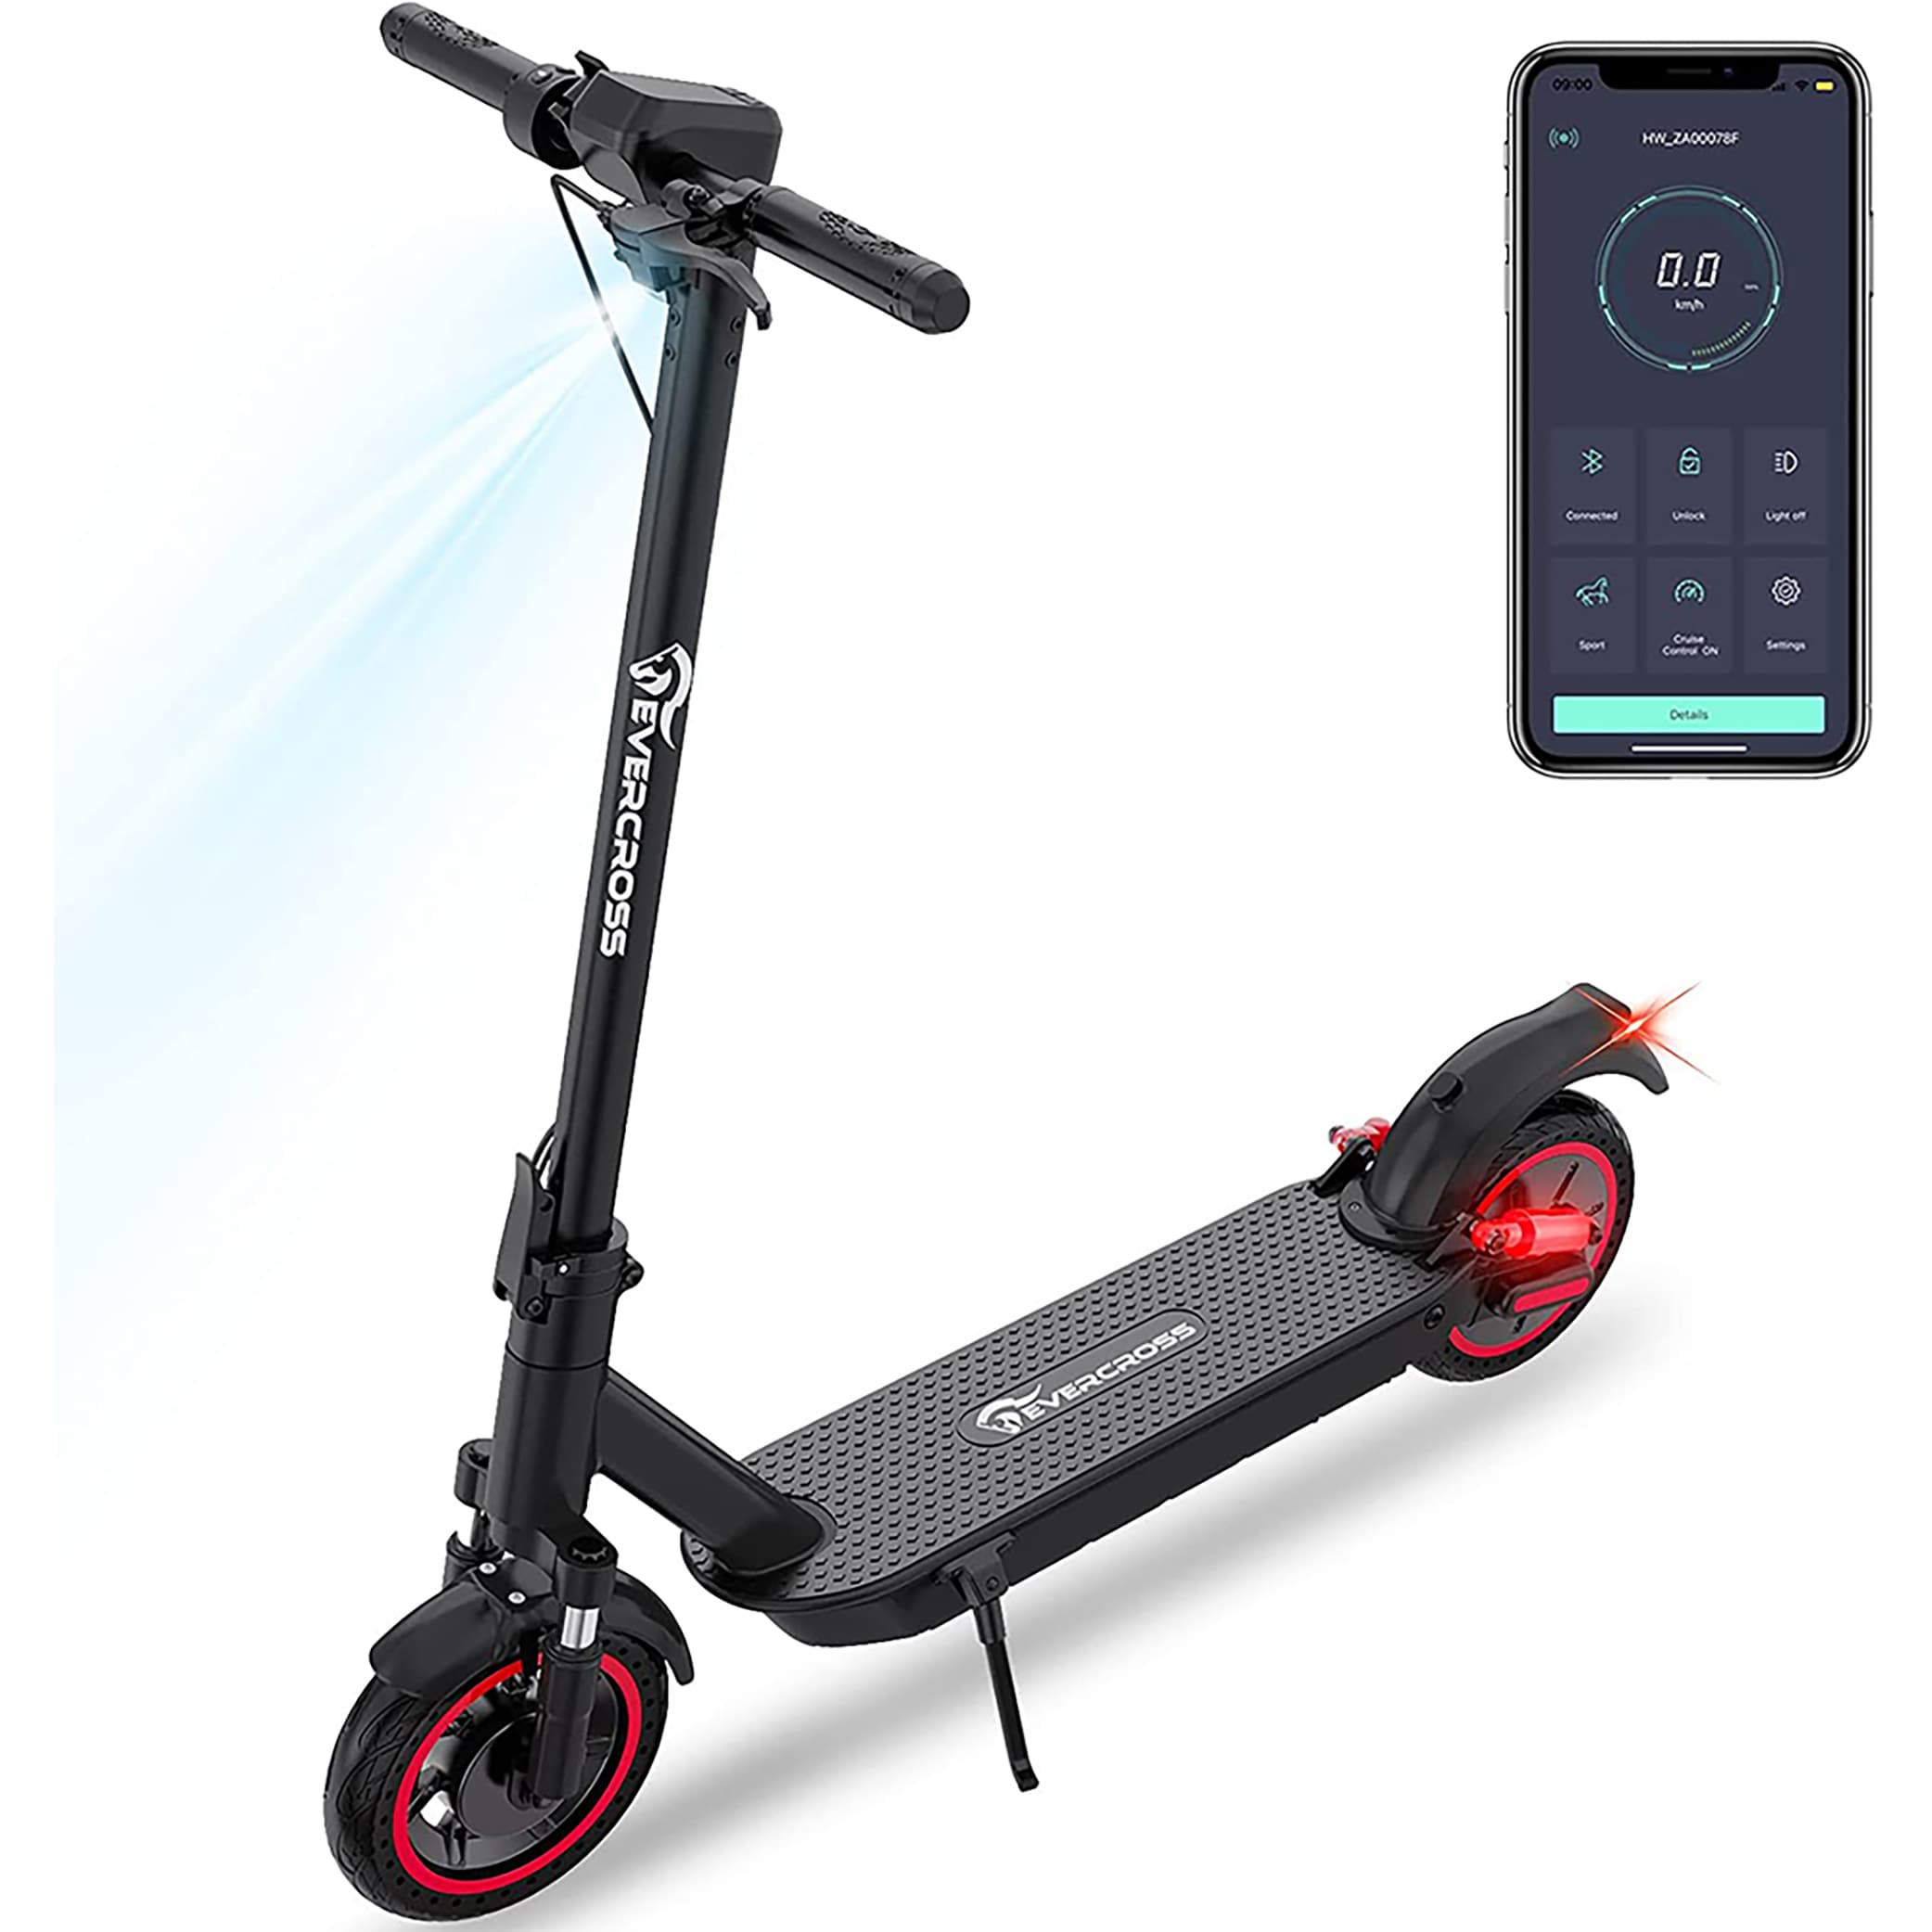 EVERCROSS EVERCROSS EV10K MAX Electric Scooter for Adults, App-Enabled Electric  Scooter with 540W Peak Power. at